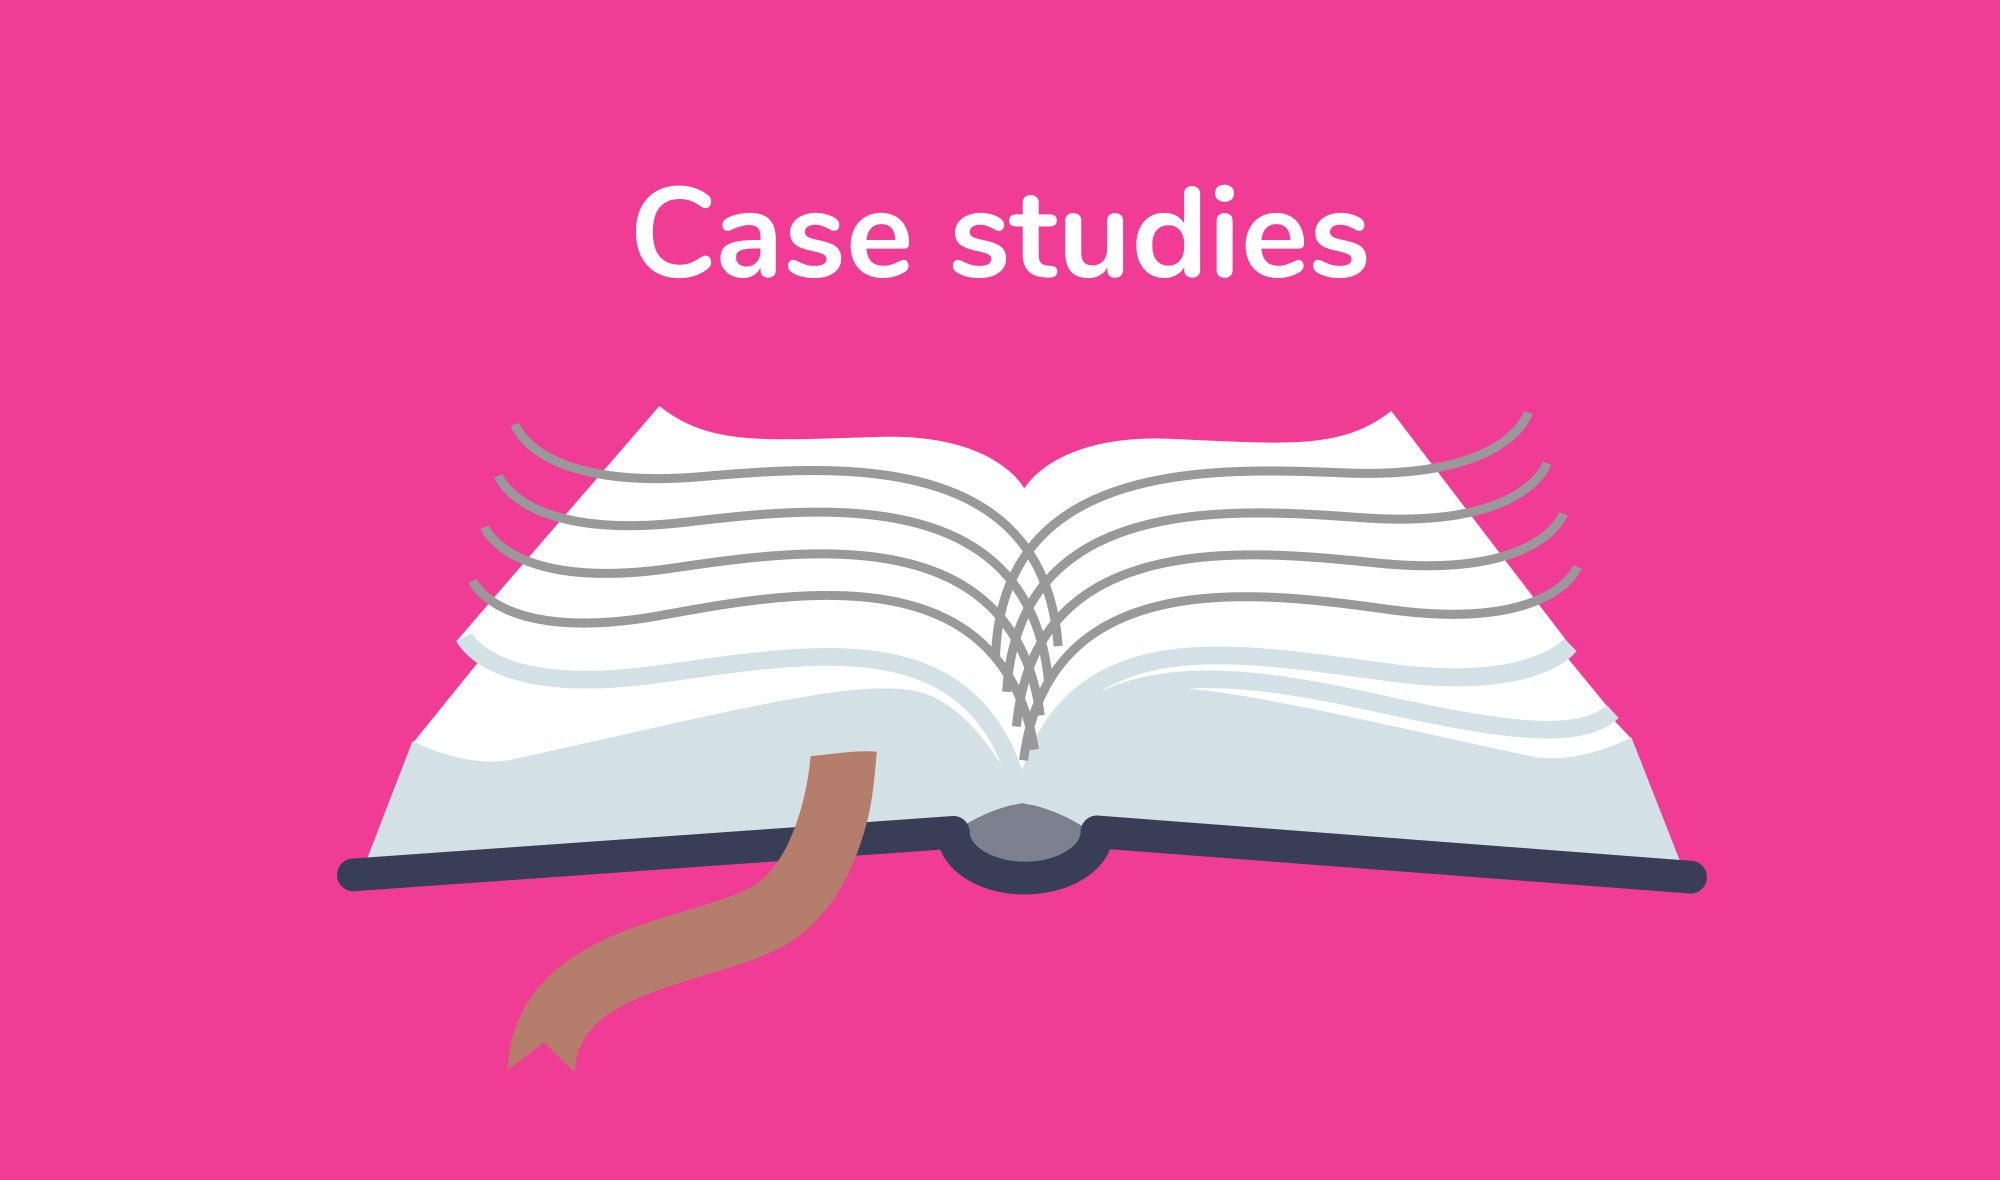 Case studies demonstrating the importance of professional development